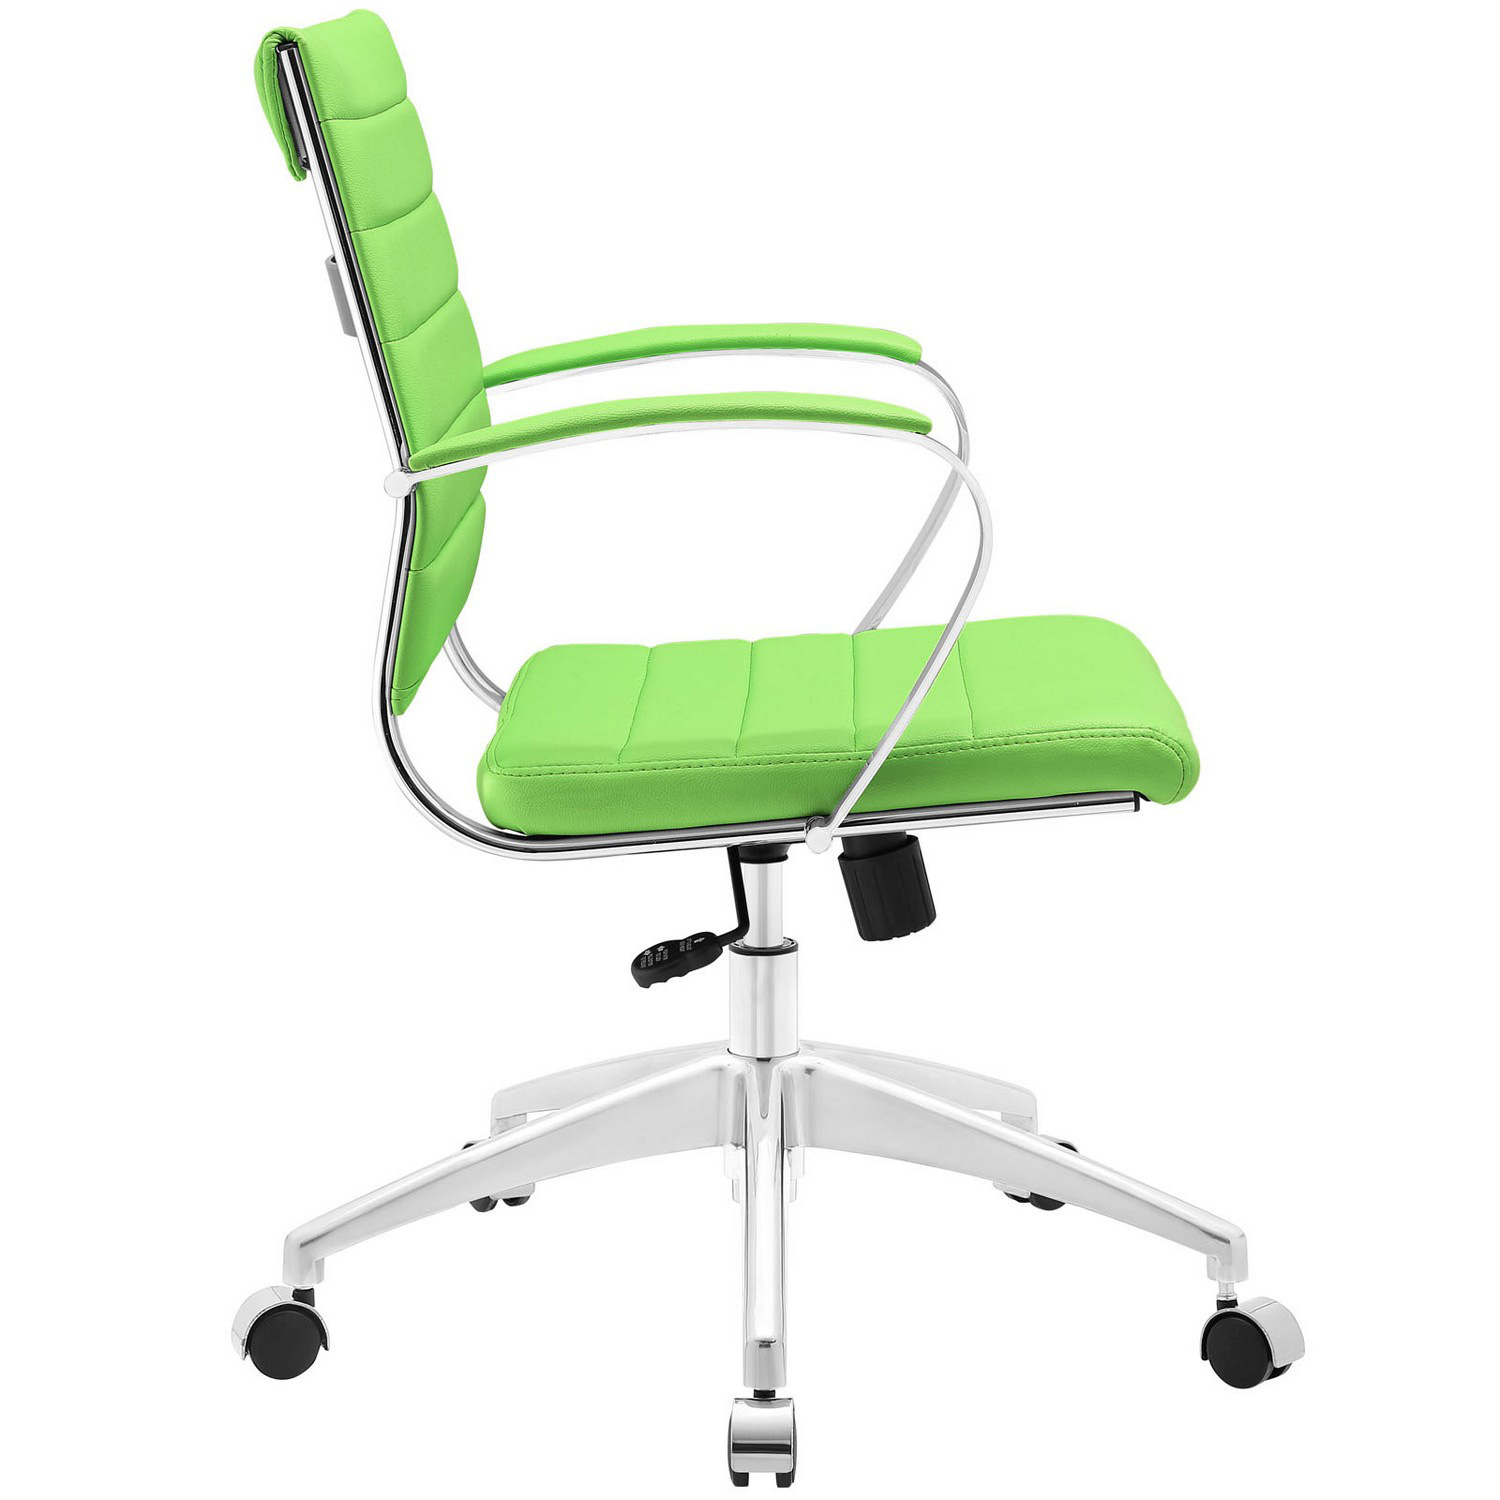 Modway Jive Mid Back Office Chair - Bright Green